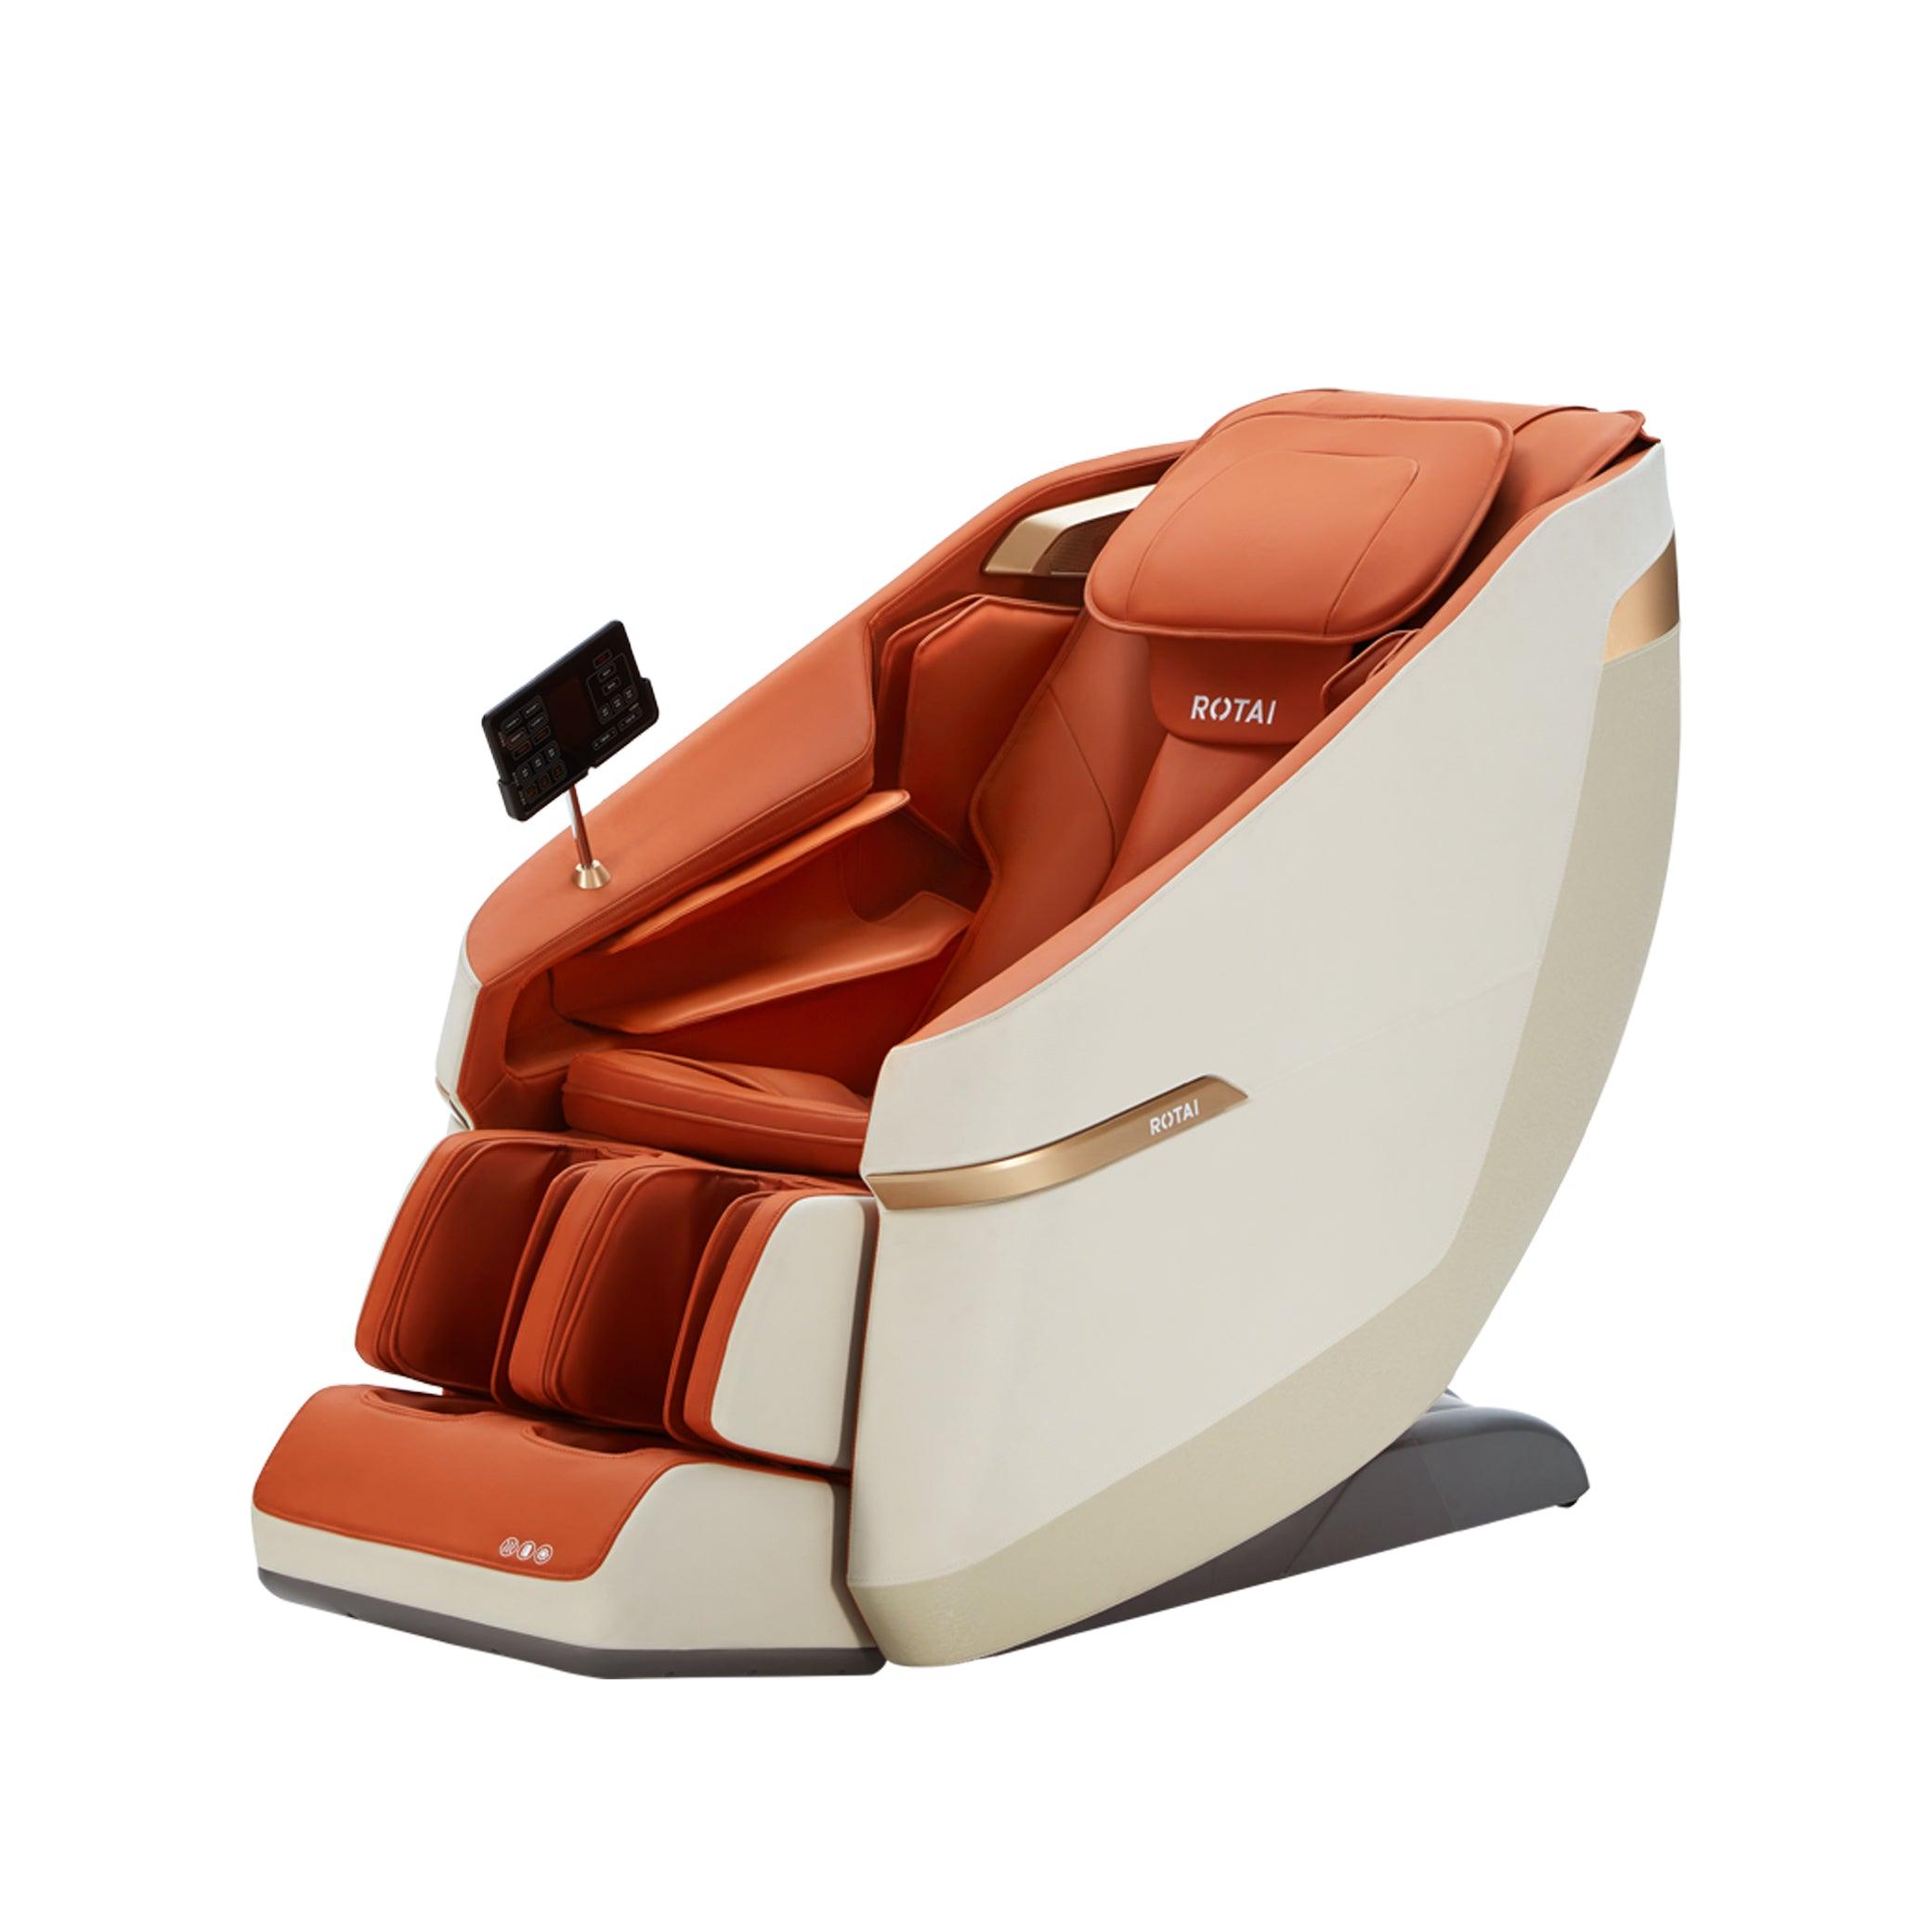 Orange Jimny massage chair with advanced features, 10-year warranty, and 1-Press Start Rocking function. Best massage chair in UAE and Dubai.